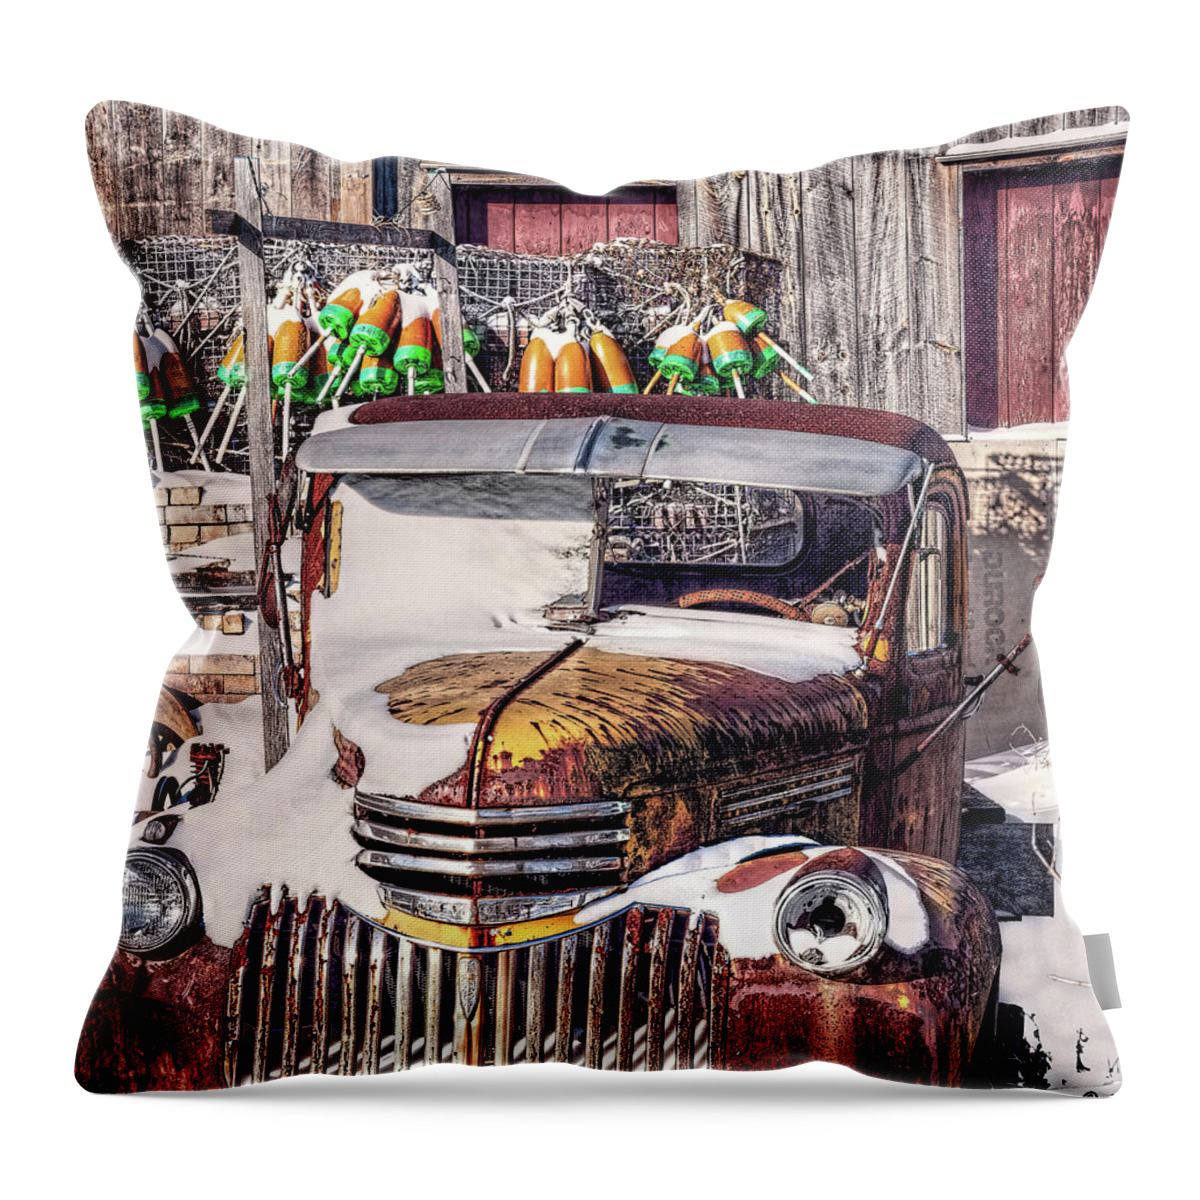 1946 Throw Pillow featuring the photograph Vintage Chevrolet by Richard Bean